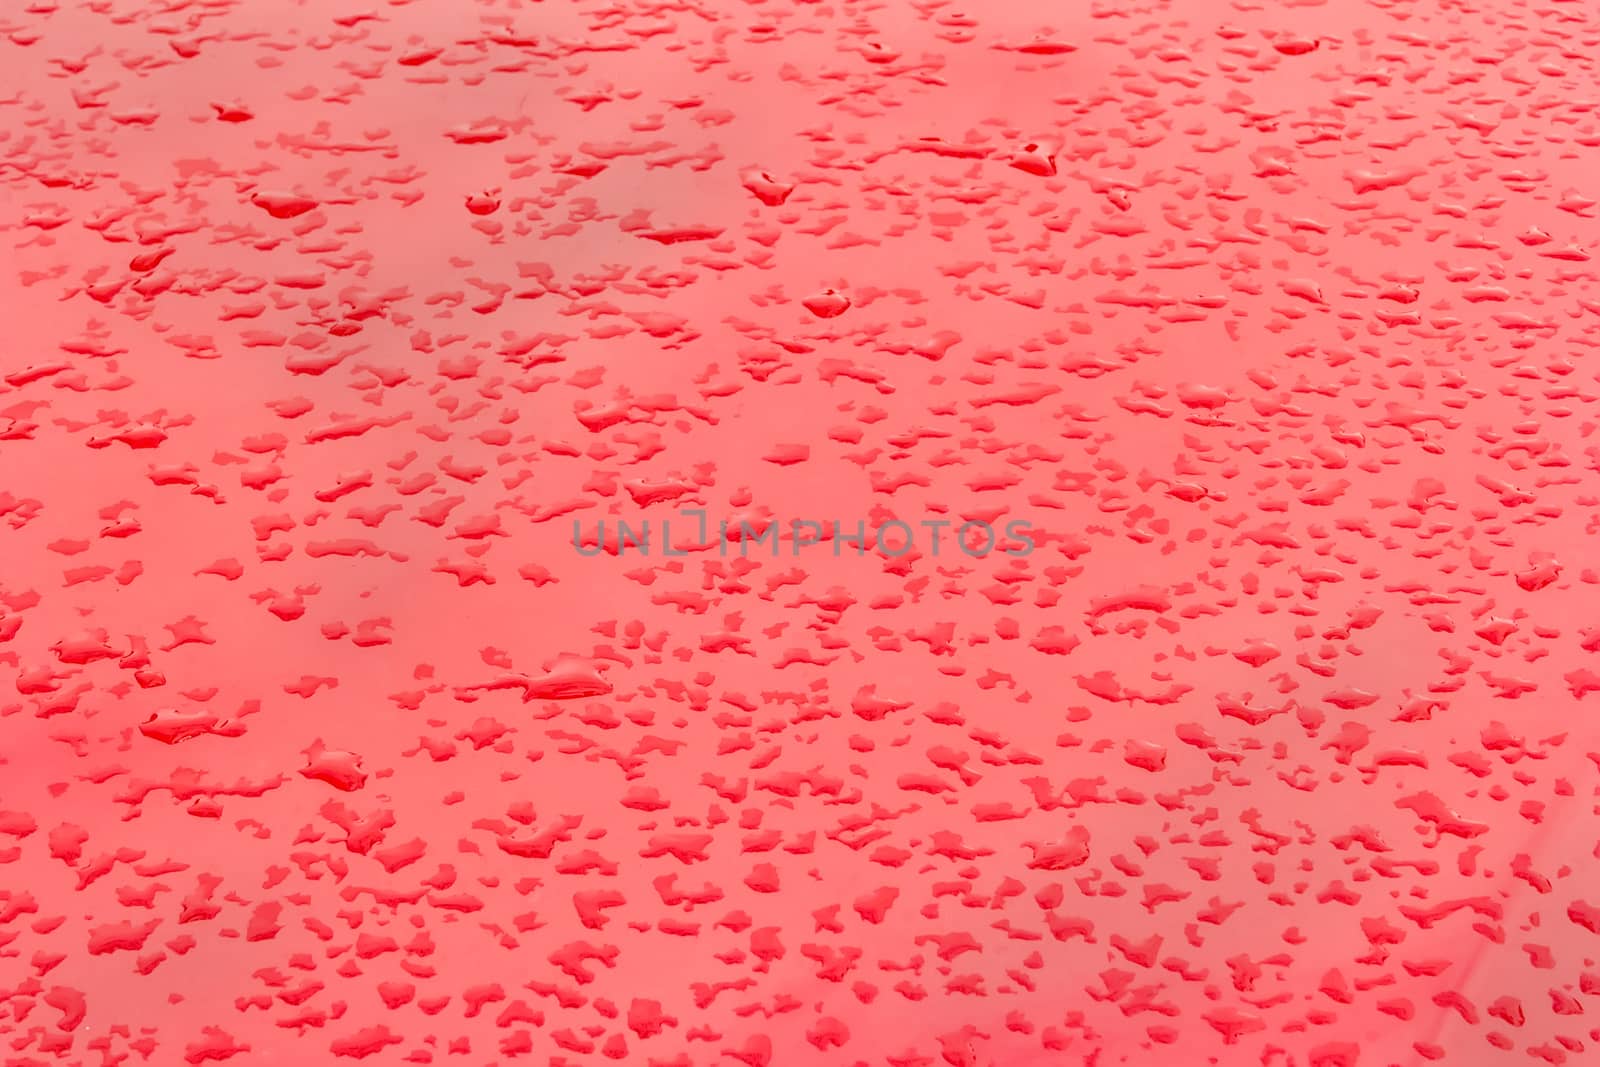 Drops of rain on red background. Natural Pattern of raindrops.